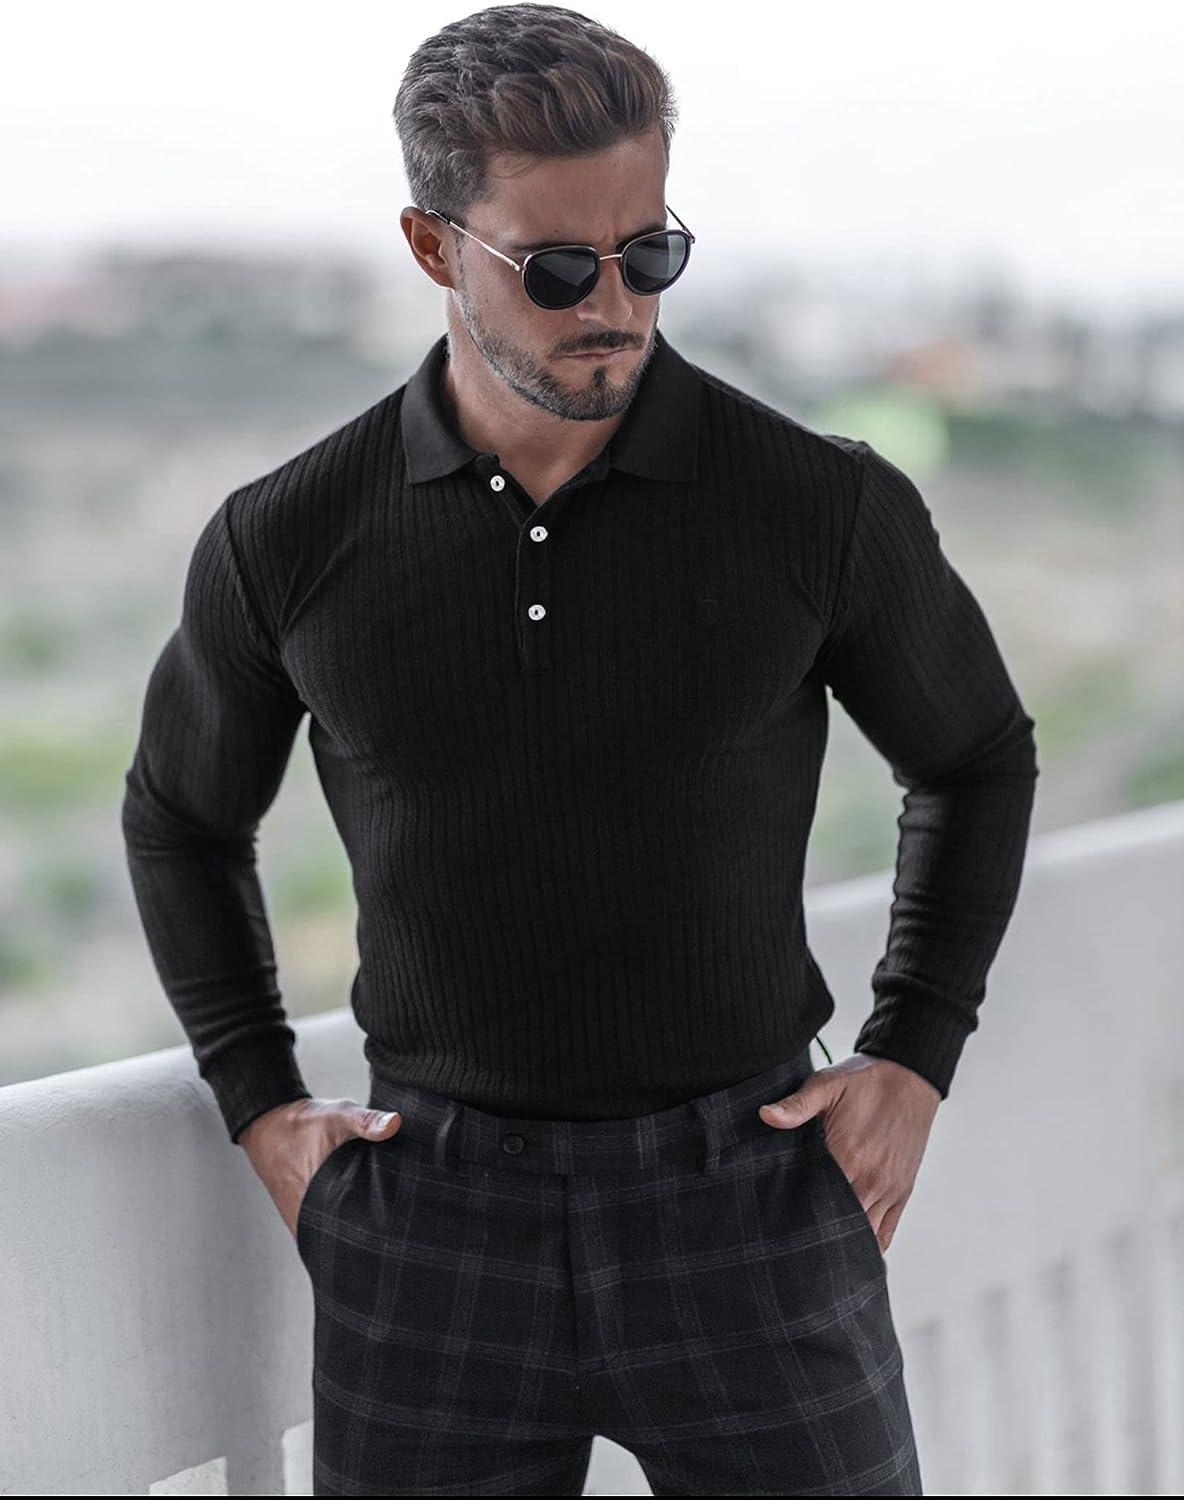 Mens Casual Slim Fit Crew Neck Long Sleeve T-Shirt Muscle Workout Tee Top  Blouse